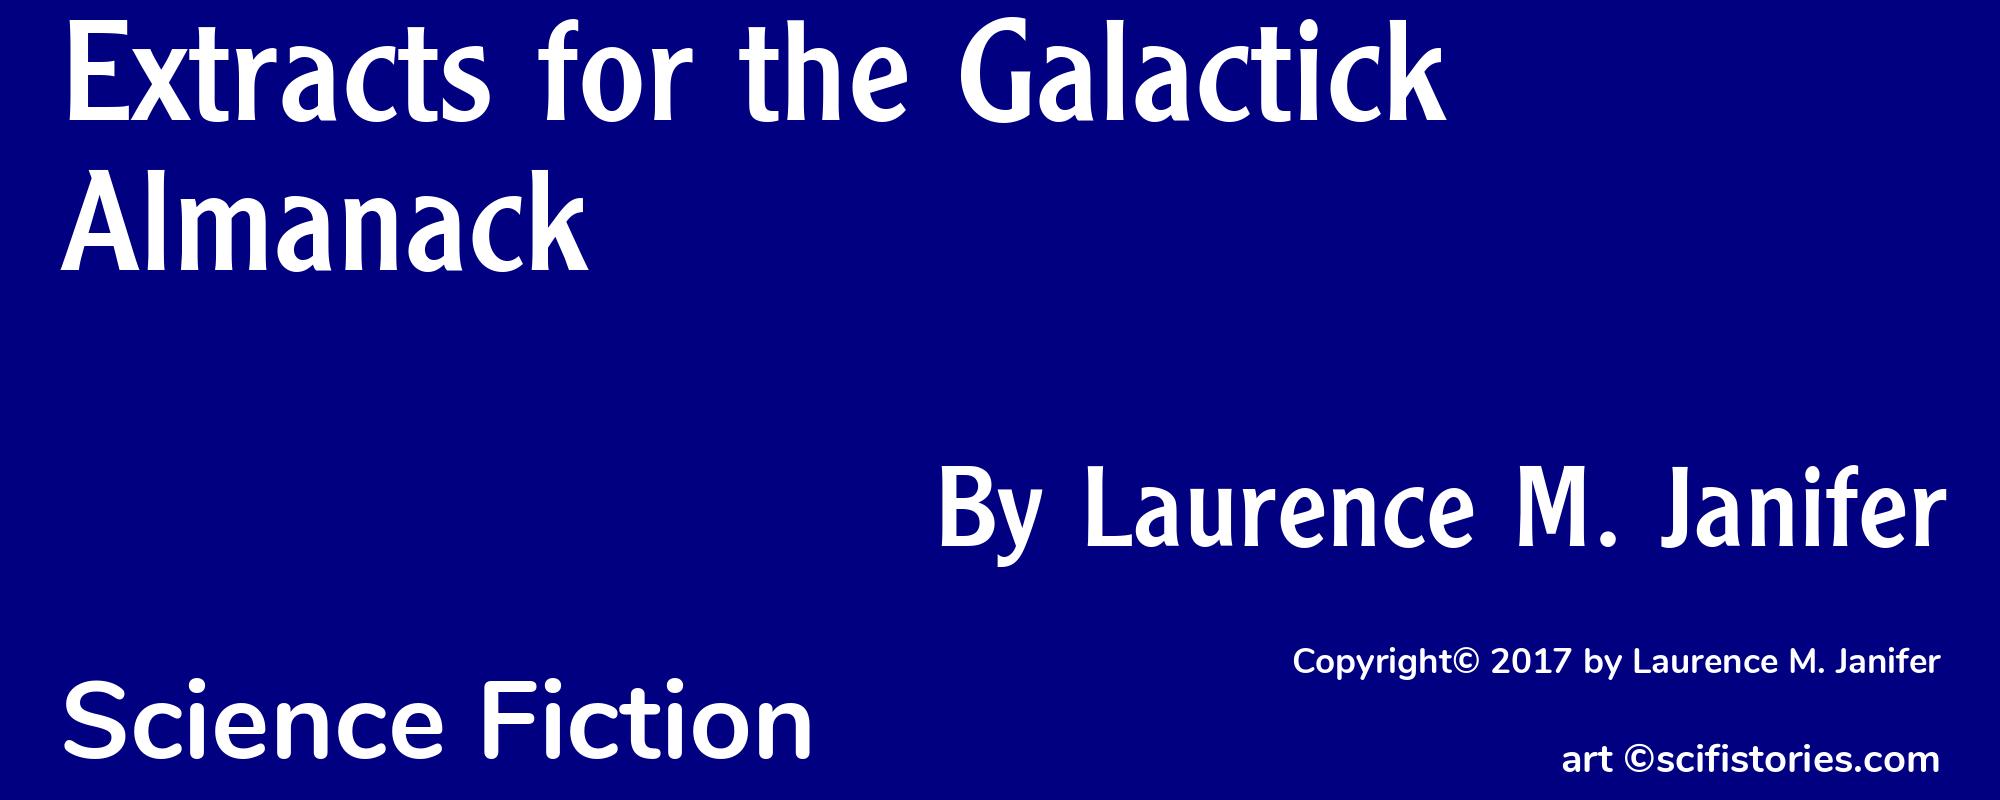 Extracts for the Galactick Almanack - Cover